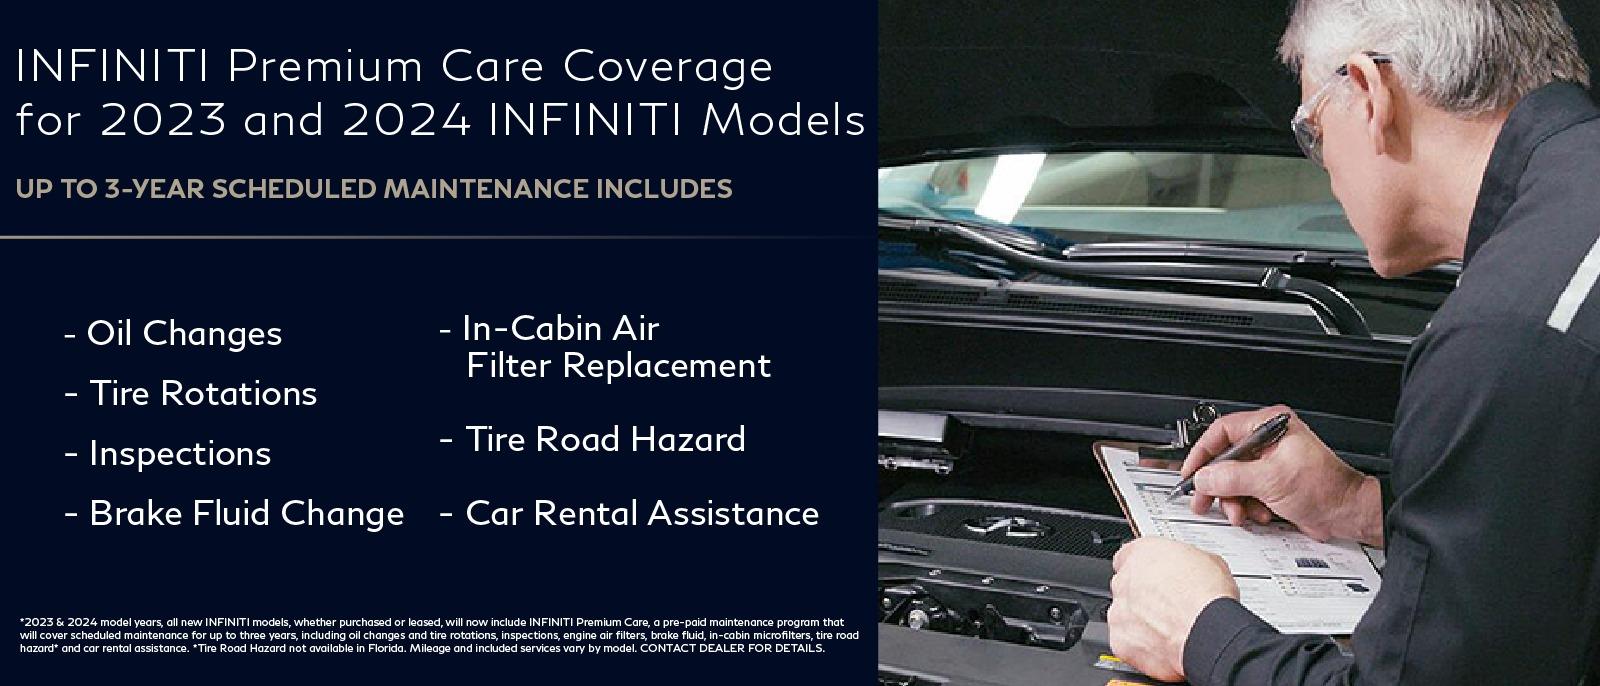 INFINITI Premium Care Coverage for 2023 INFINITI models
up to 3-Year Scheduled Maintenance Includes:
Oil Changes, Tire Rotations, Inspection, Brake Fluid Change, In-Cabin Air Filter Replacement, Tire Road Hazard, Car Rental Assistance

*2023 model years, all new INFINITI models, whether purchased or leased, will now include INFINITI Premium Care, a pre-paid maintenance program that will cover scheduled maintenance for up to three years, including oil changes and tire rotations, inspections, engine air filters, brake fluid, in-cabin microfilters, tire road hazard and car rental assistance. *Tire Road Hazard not available in Florida. Mileage and included services vary by model. CONTACT DEALER FOR DETAILS.